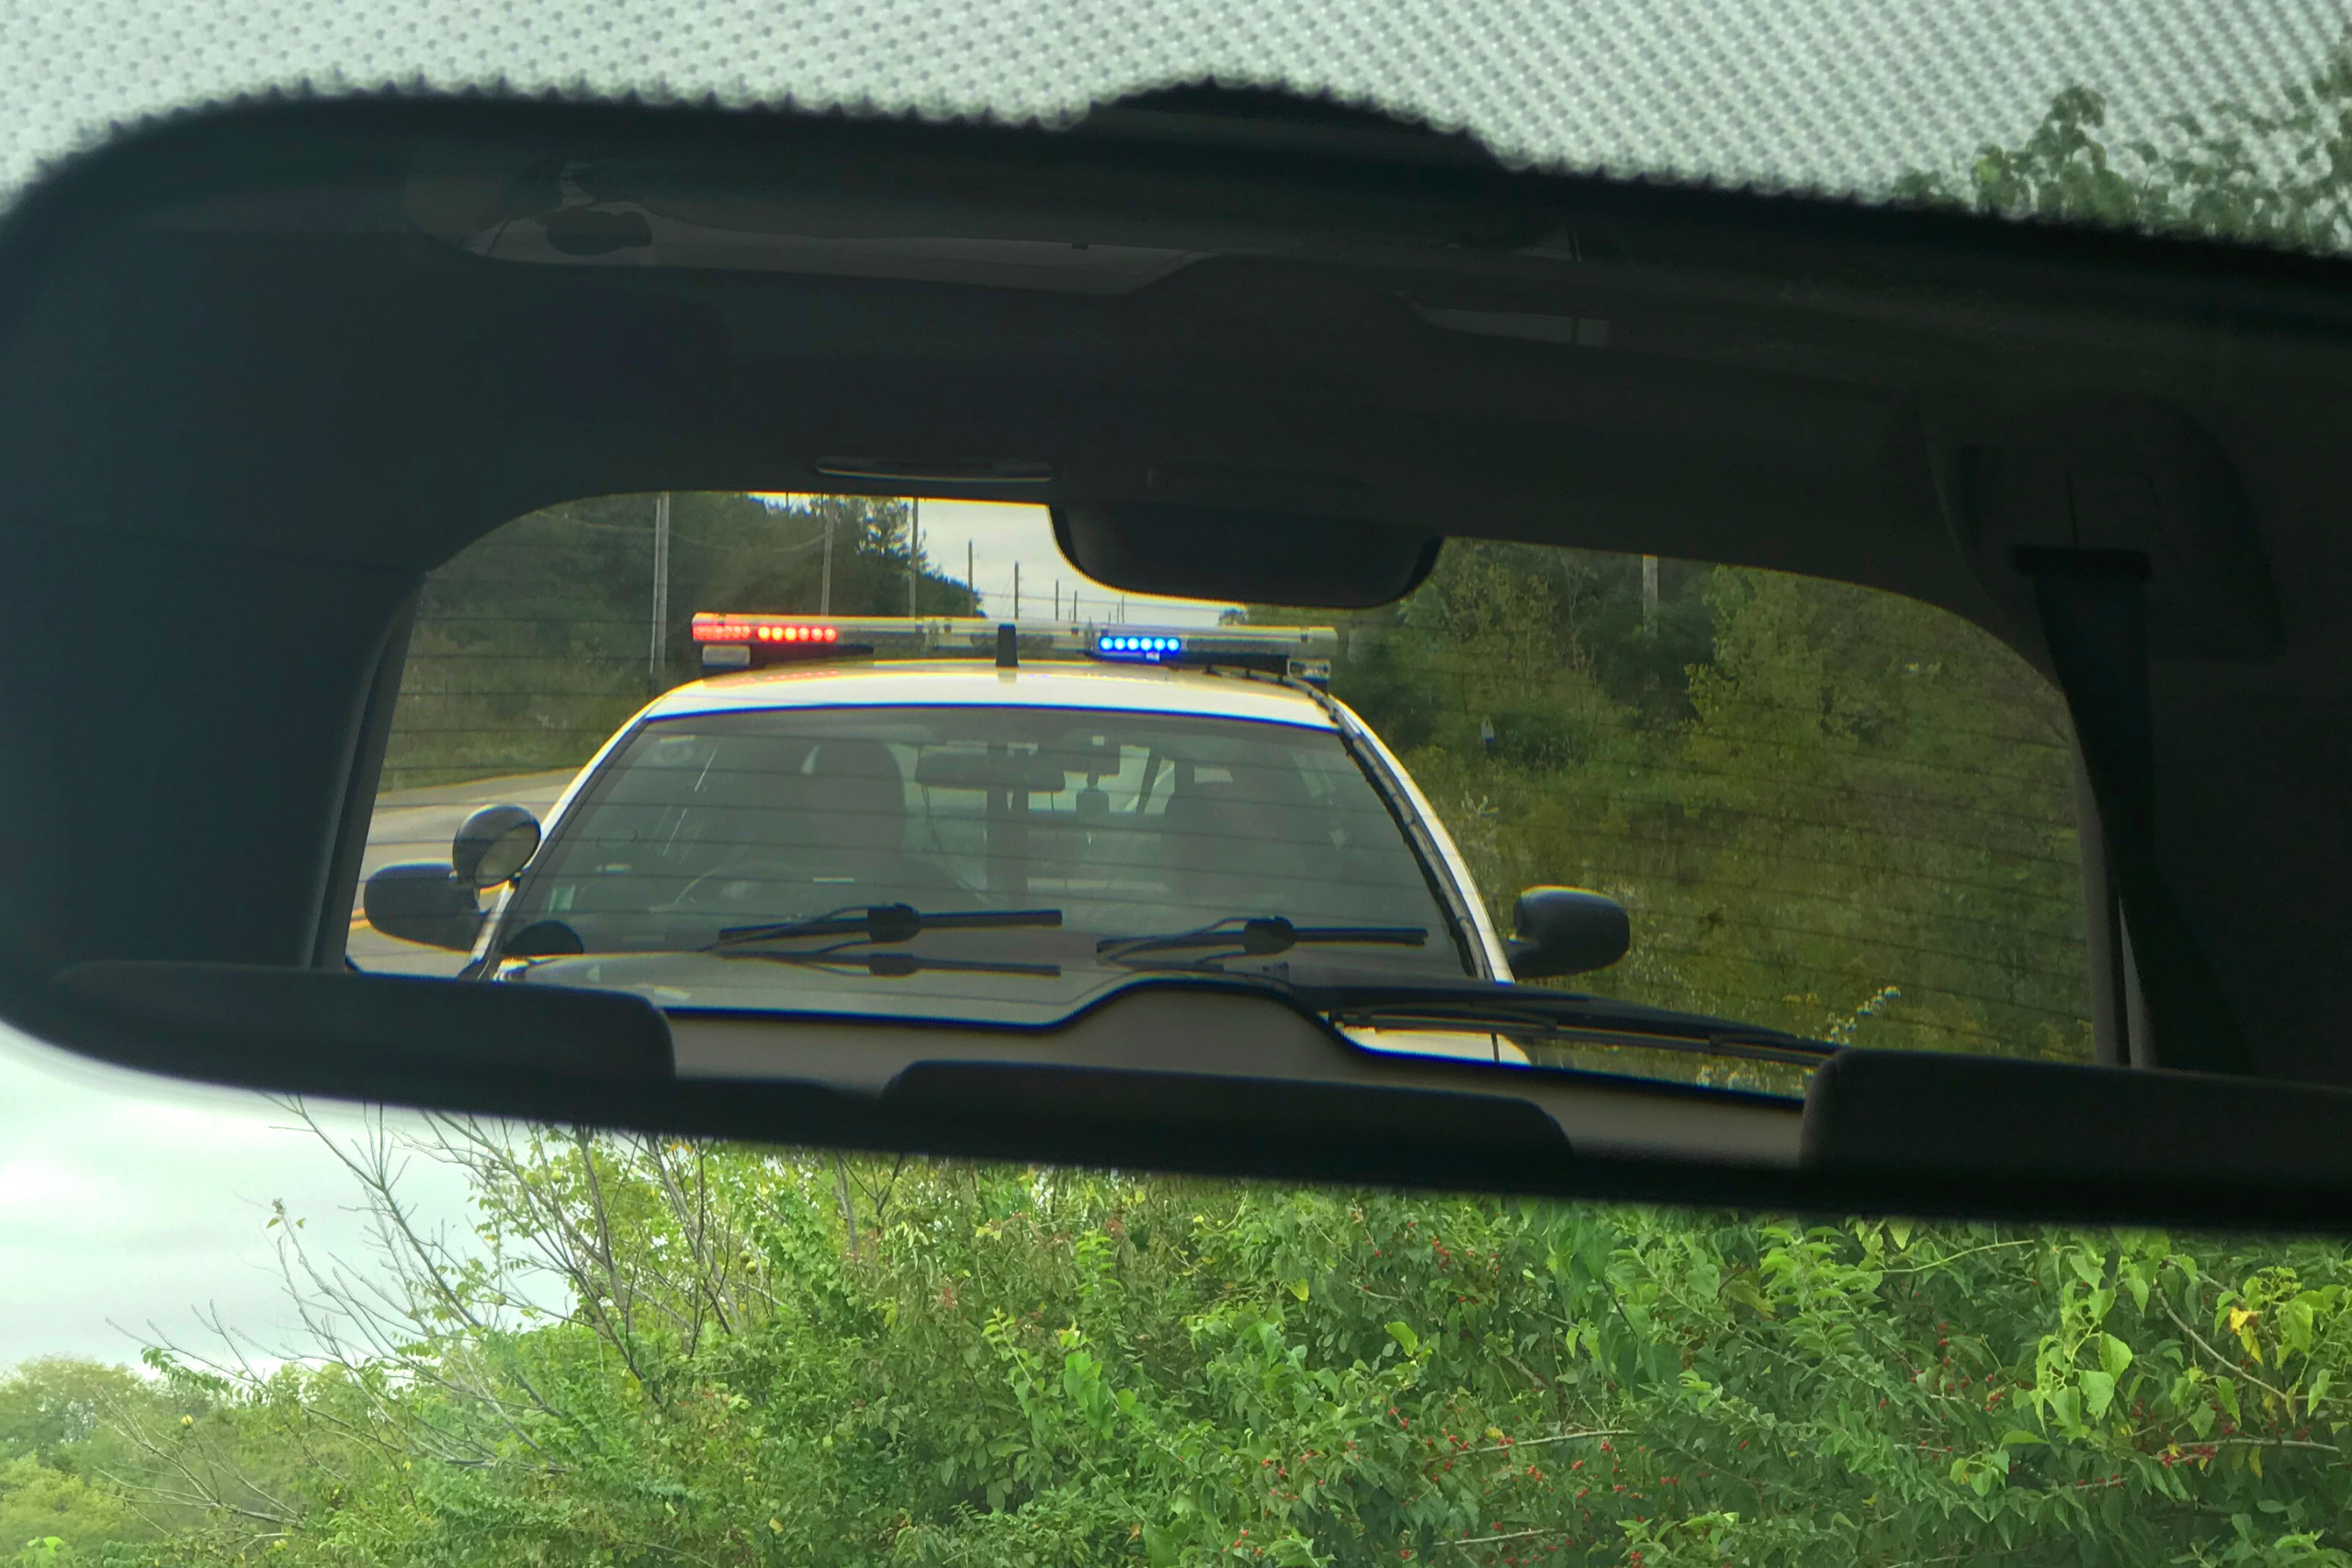 View from the inside of a car through the rearview mirror, showing a police car with flashing lights behind, suggesting the driver may have been pulled over.